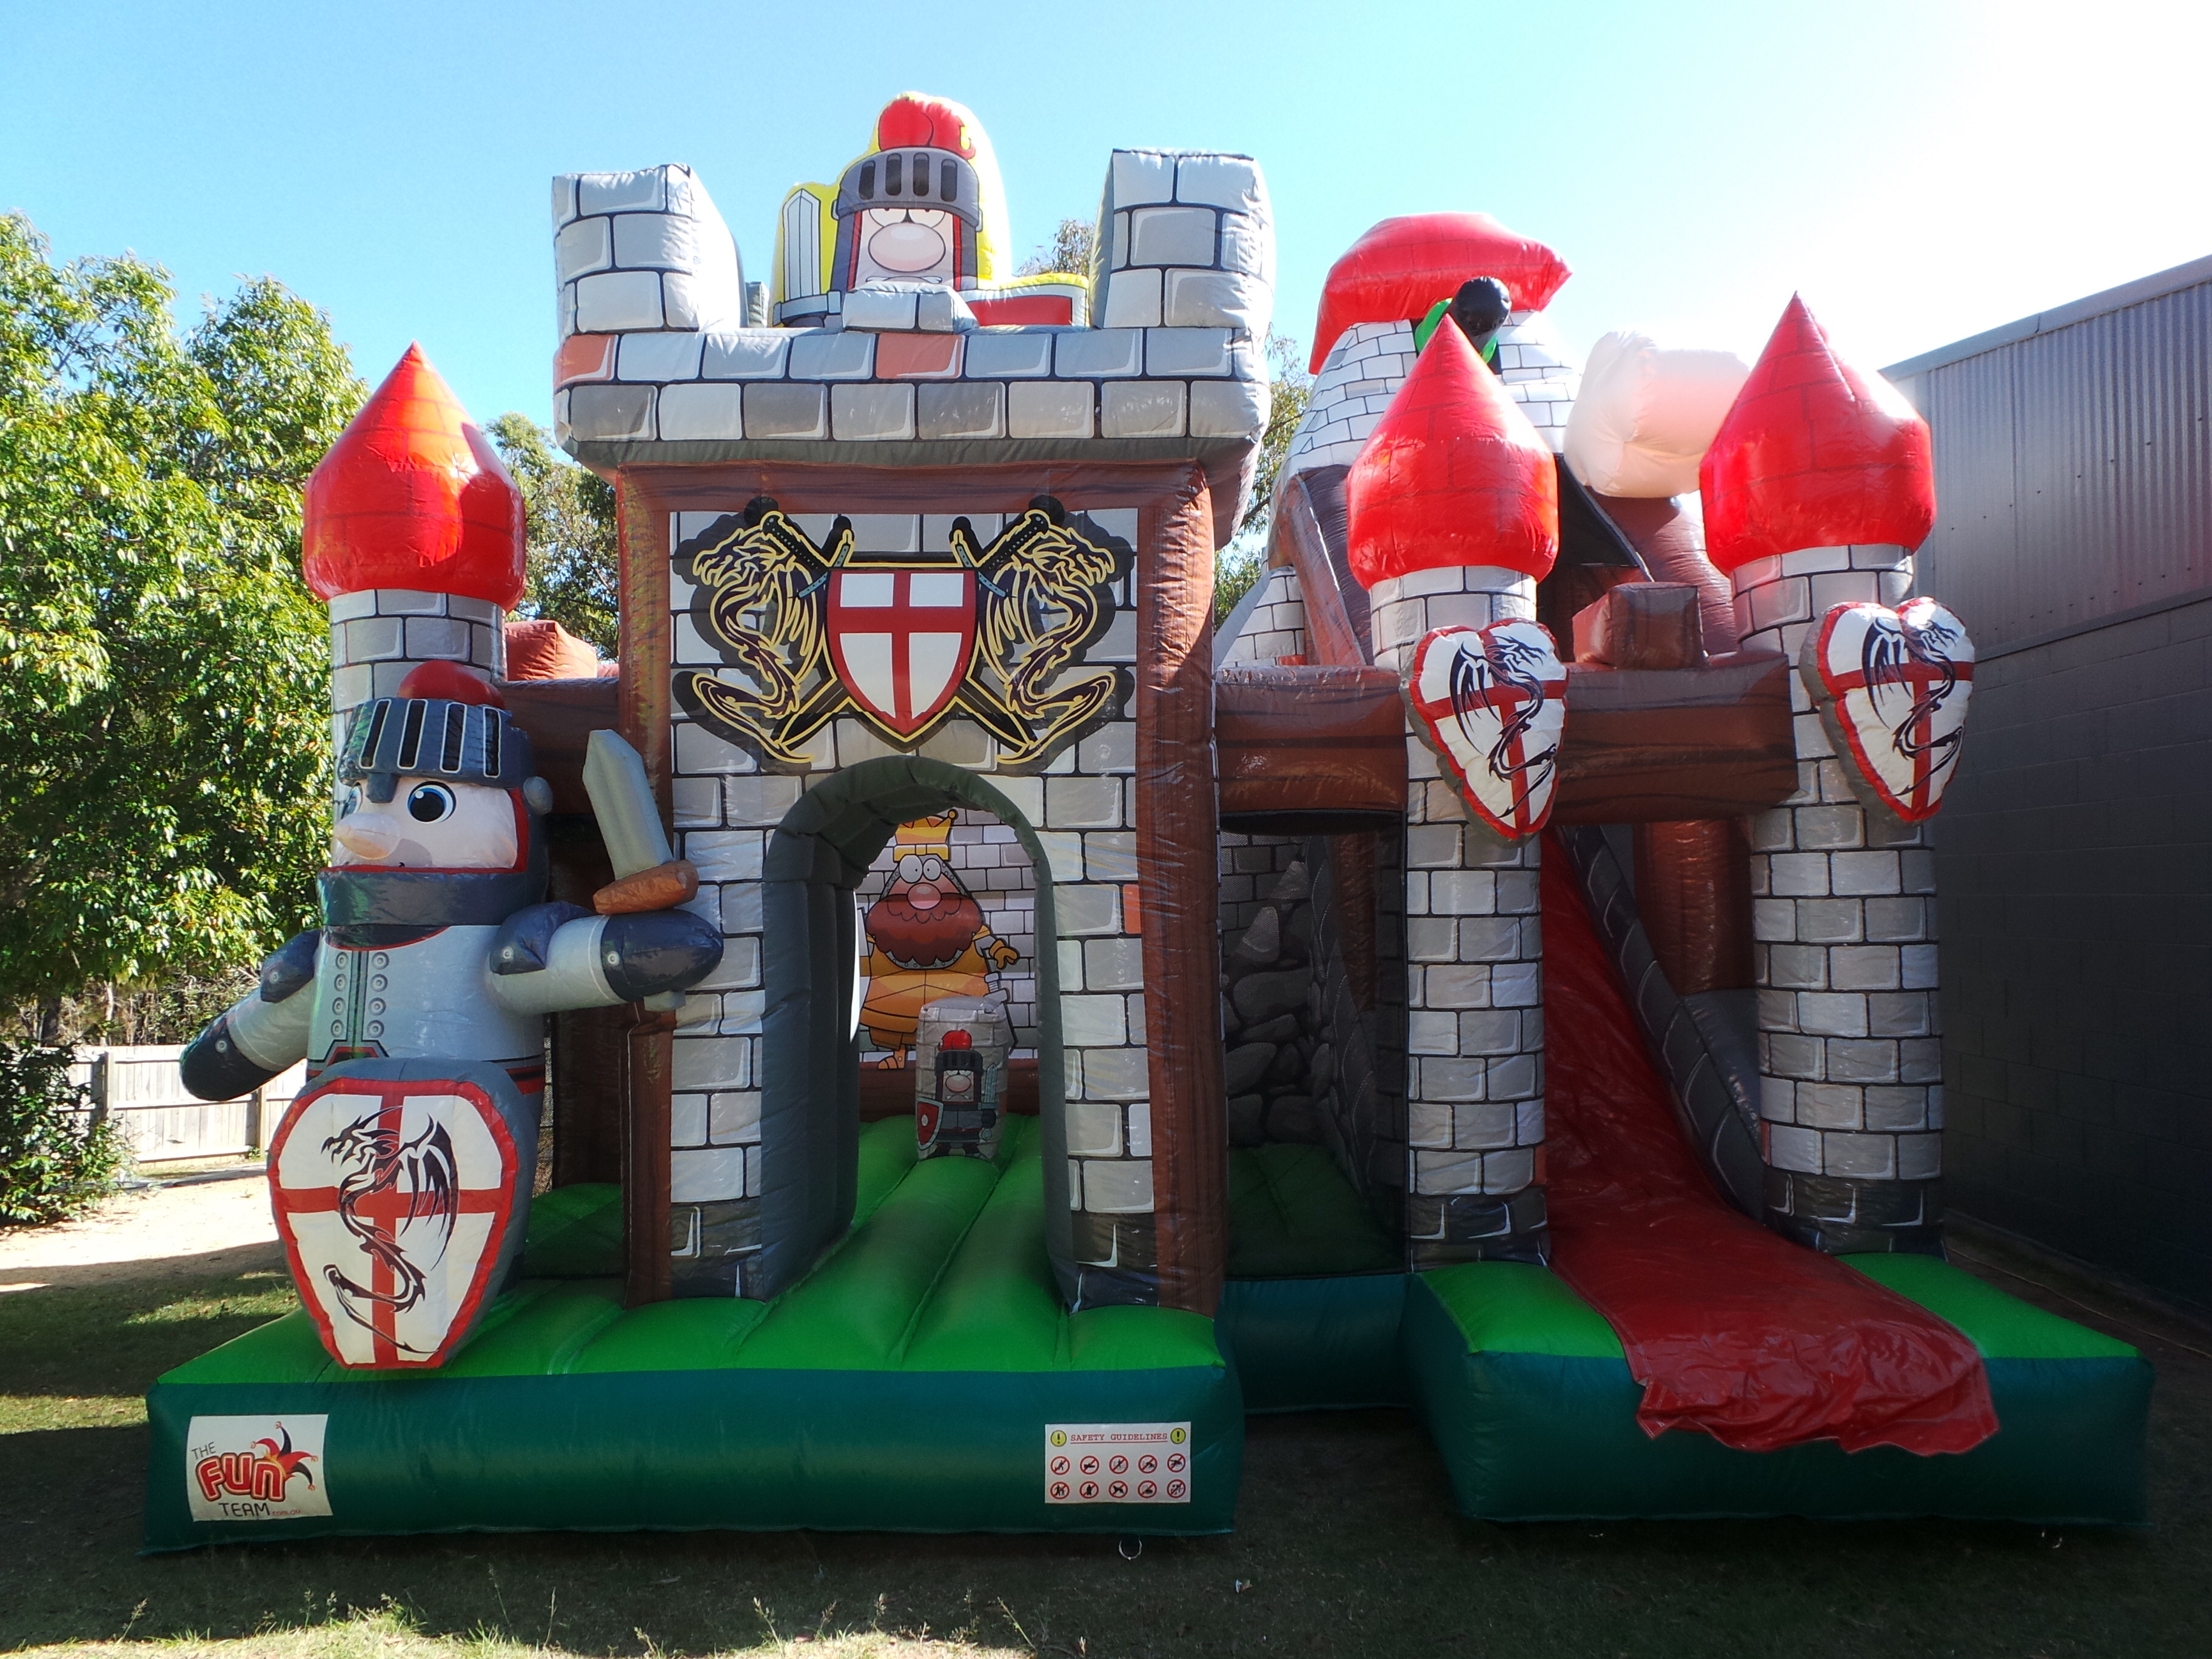 jumping castle for adults